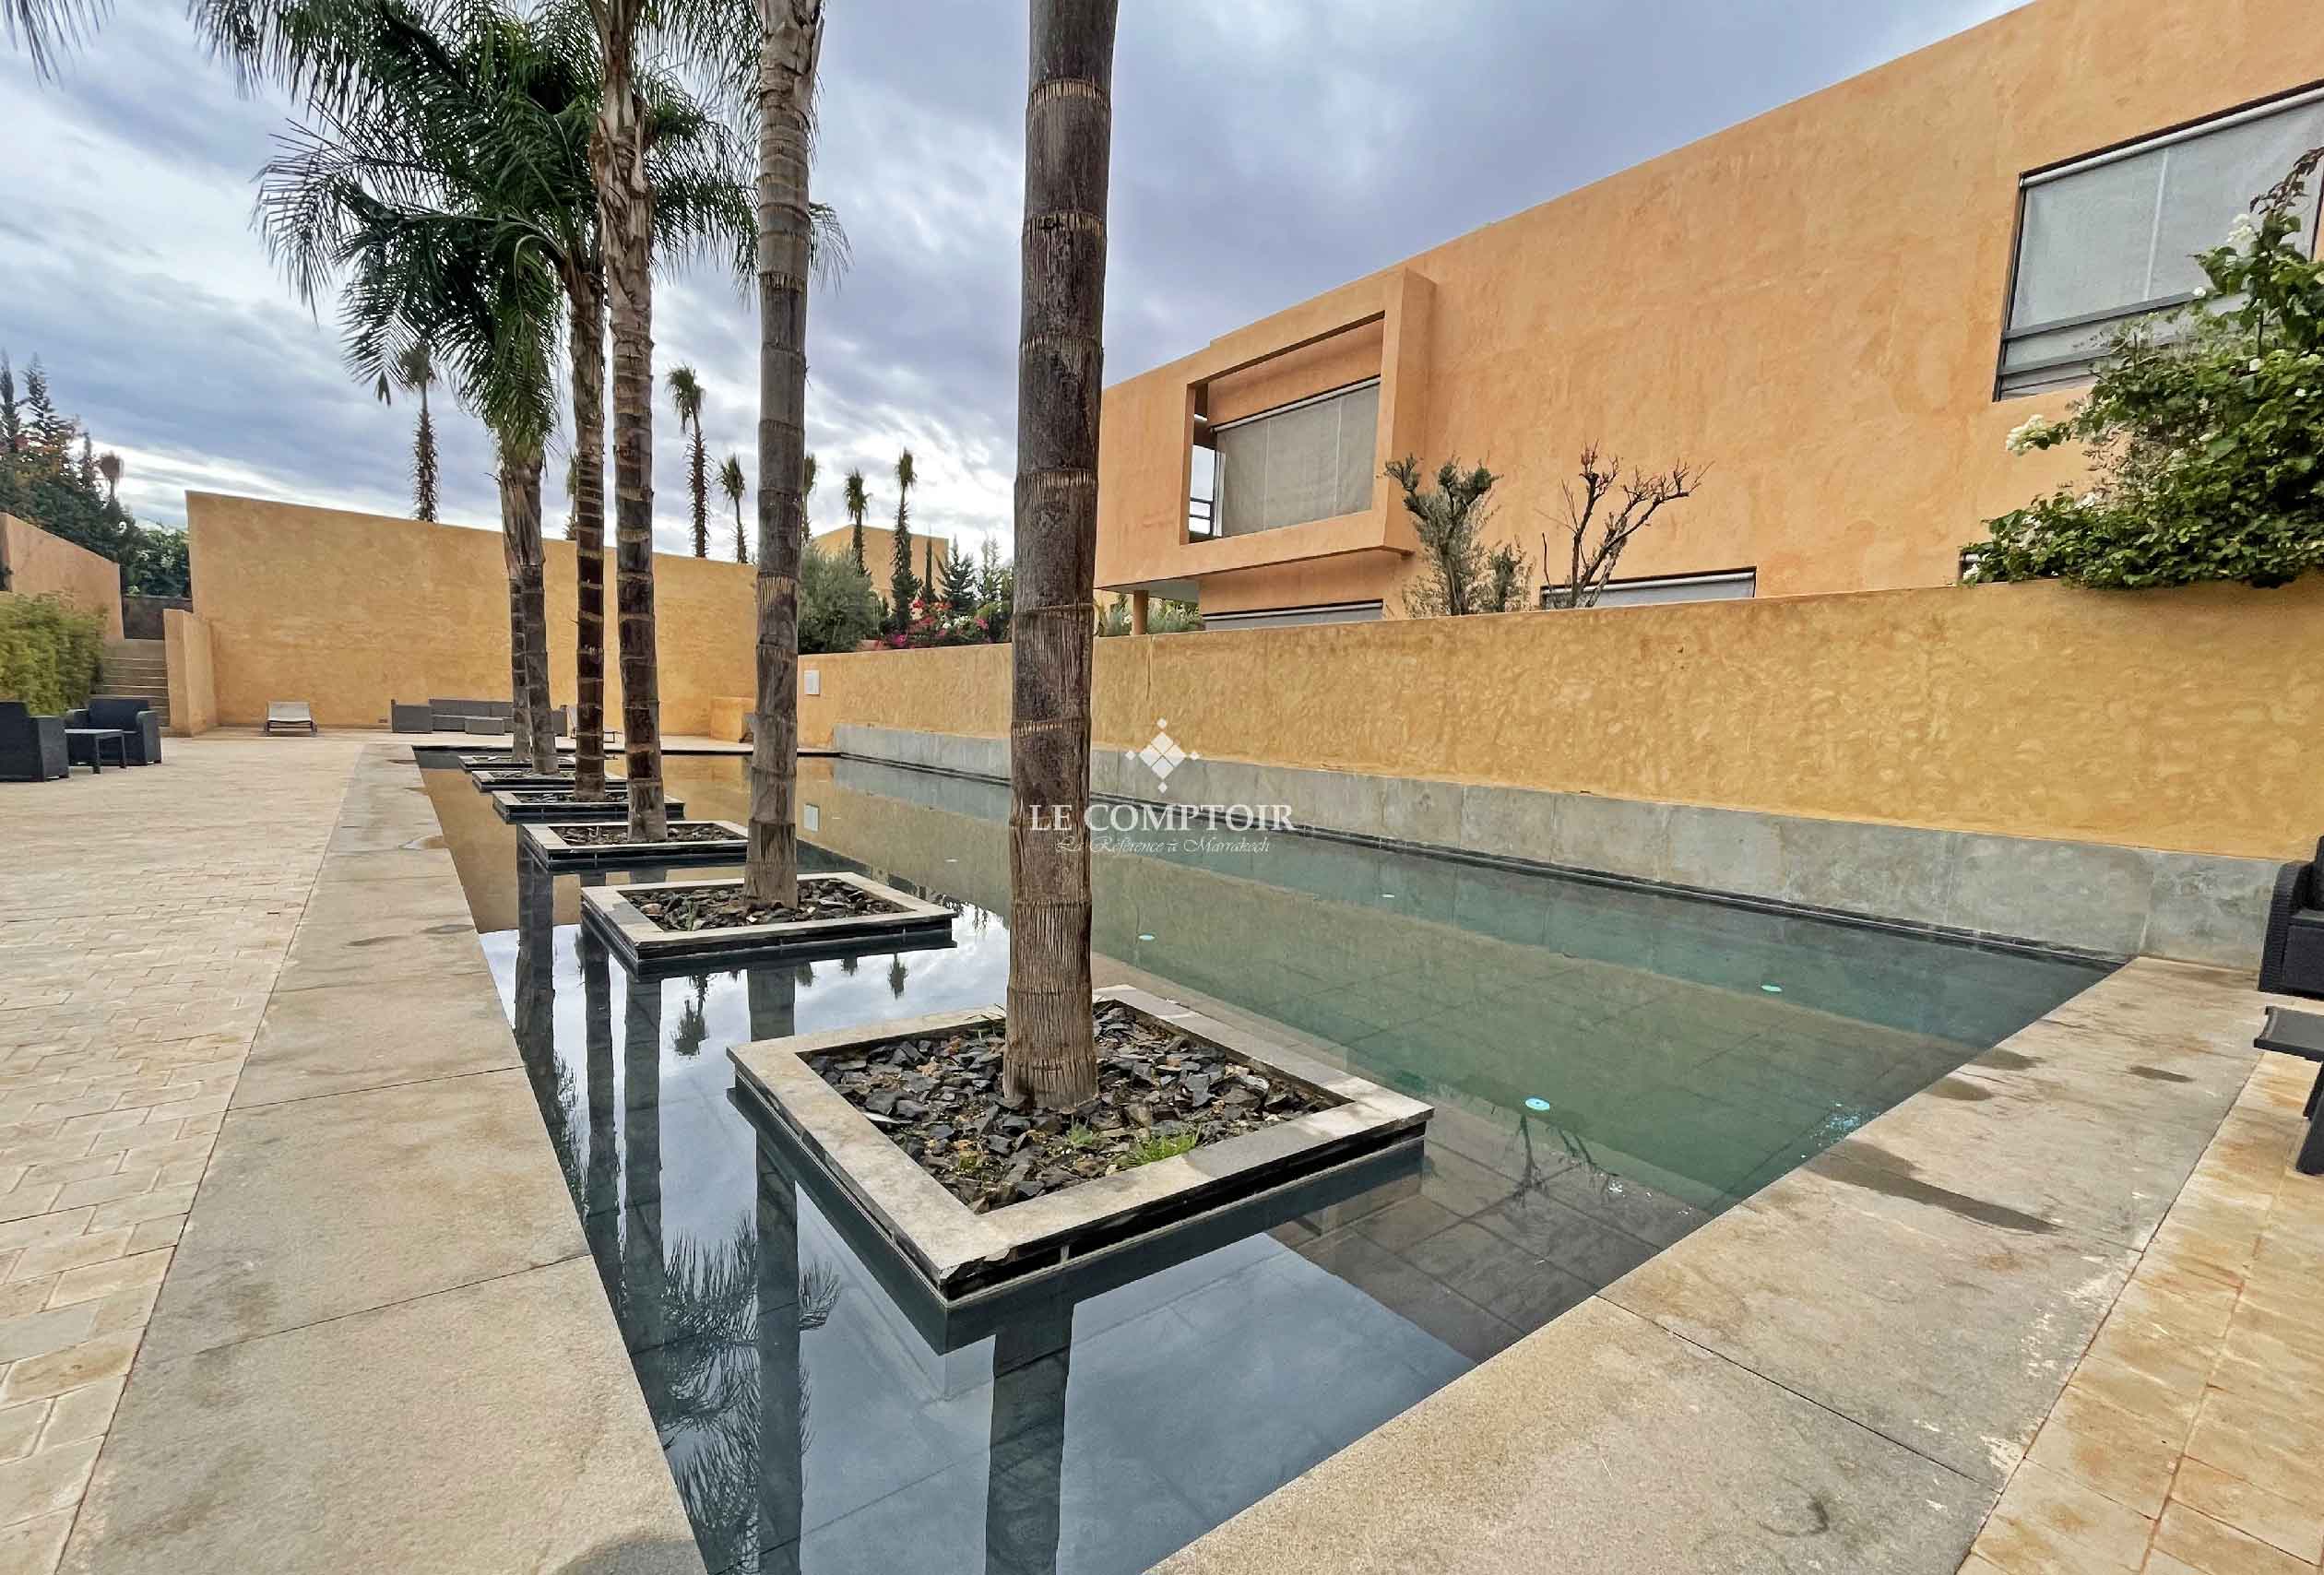 Le Comptoir Immobilier Agence Immobiliere Marrakech IMG 7358